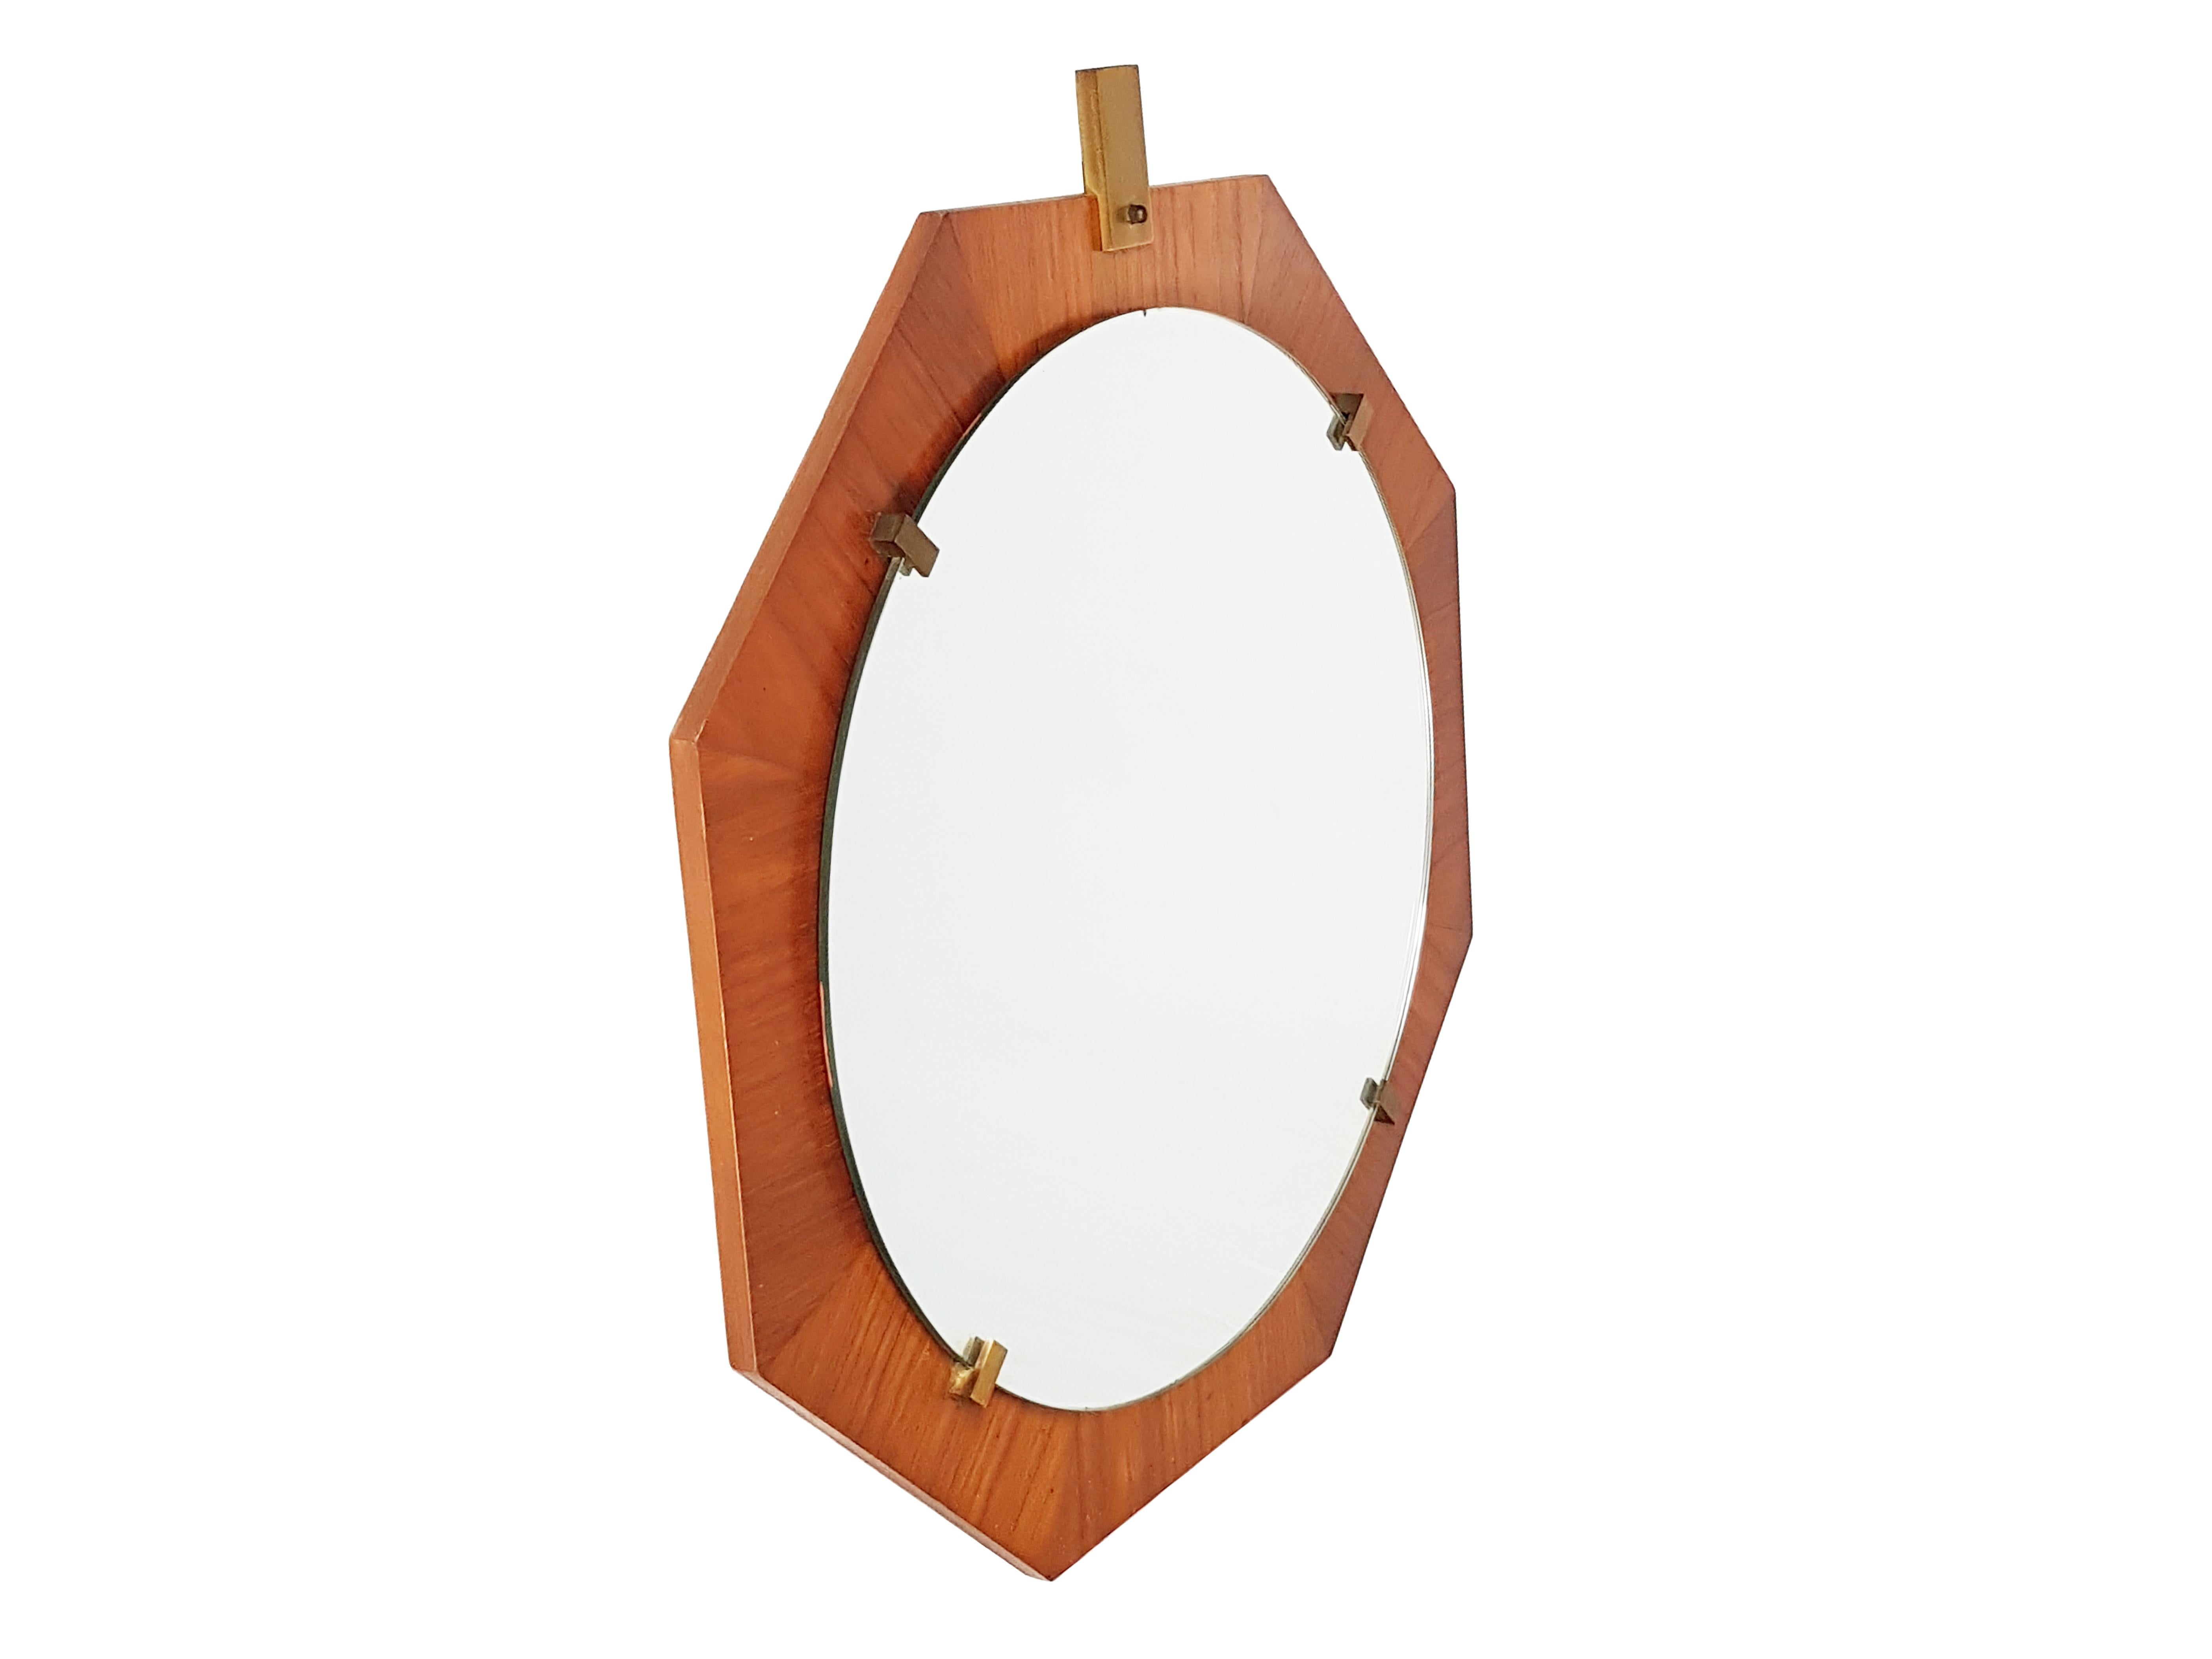 This mirror was produced in Italy in the 1960s. It has an octagonal shape and it is made from a teak structure with brass holders and a round mirrored glass. It remains in very good vintage condition.